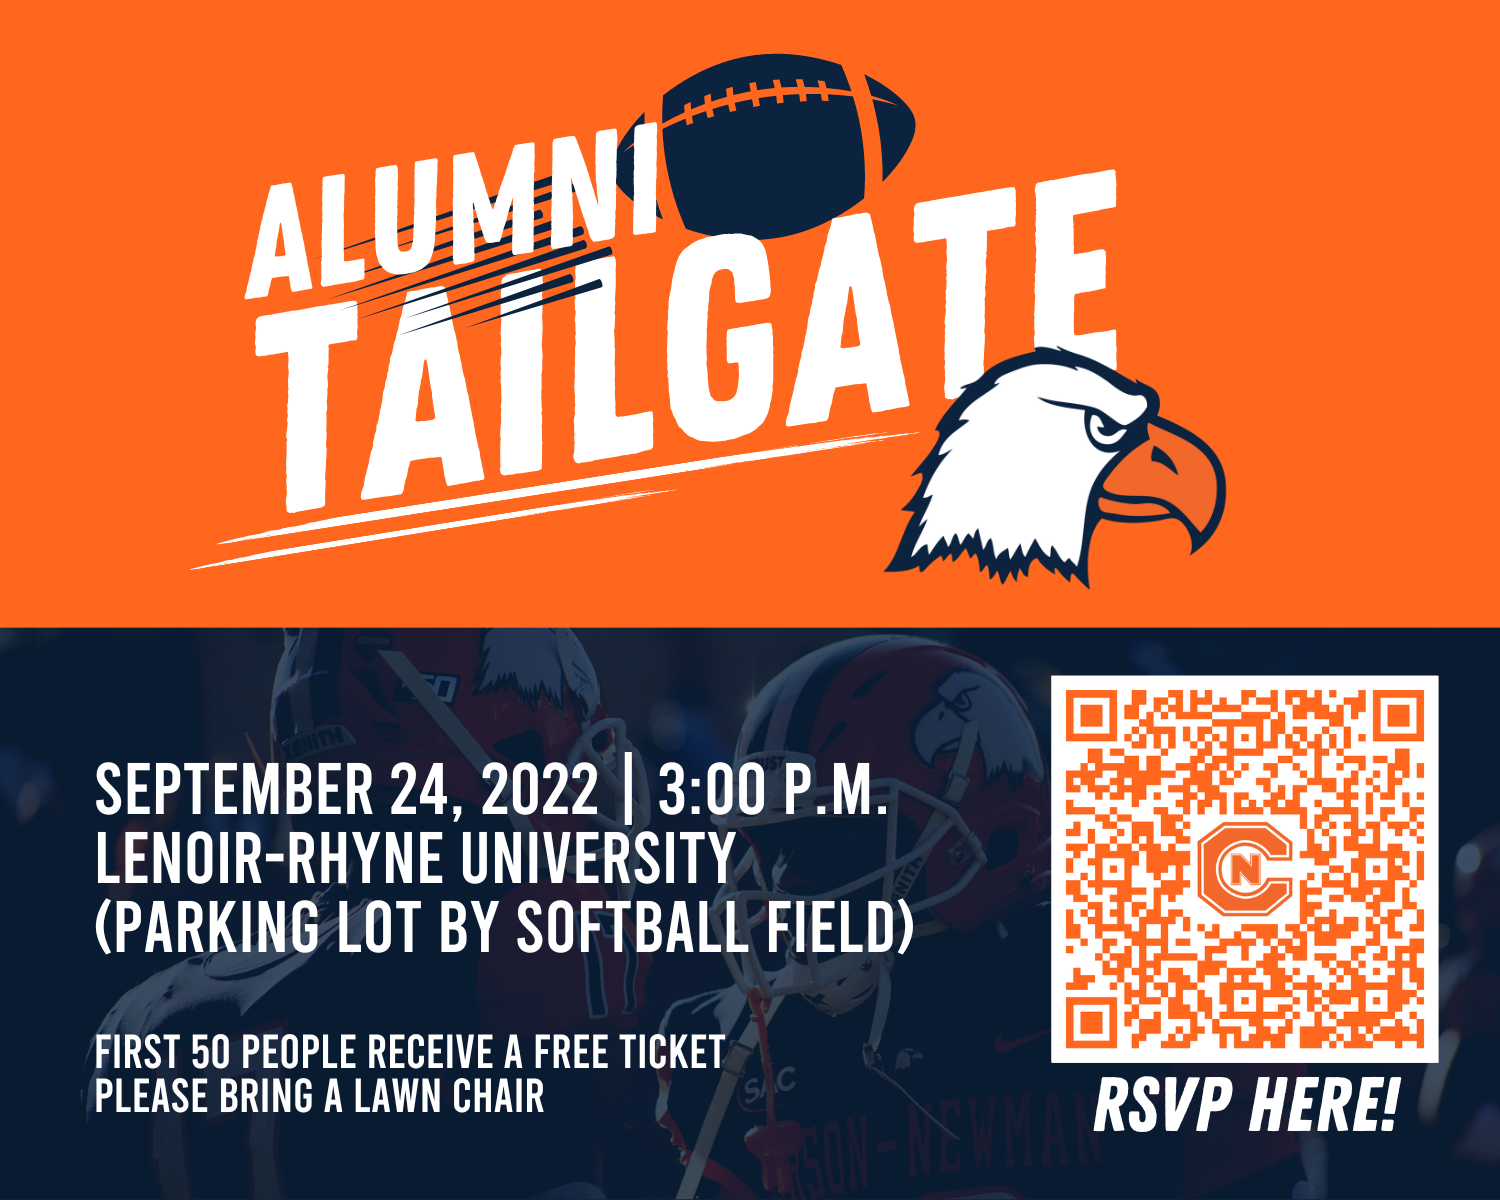 Alumni relations to play host to tailgate prior to game at Lenoir-Rhyne